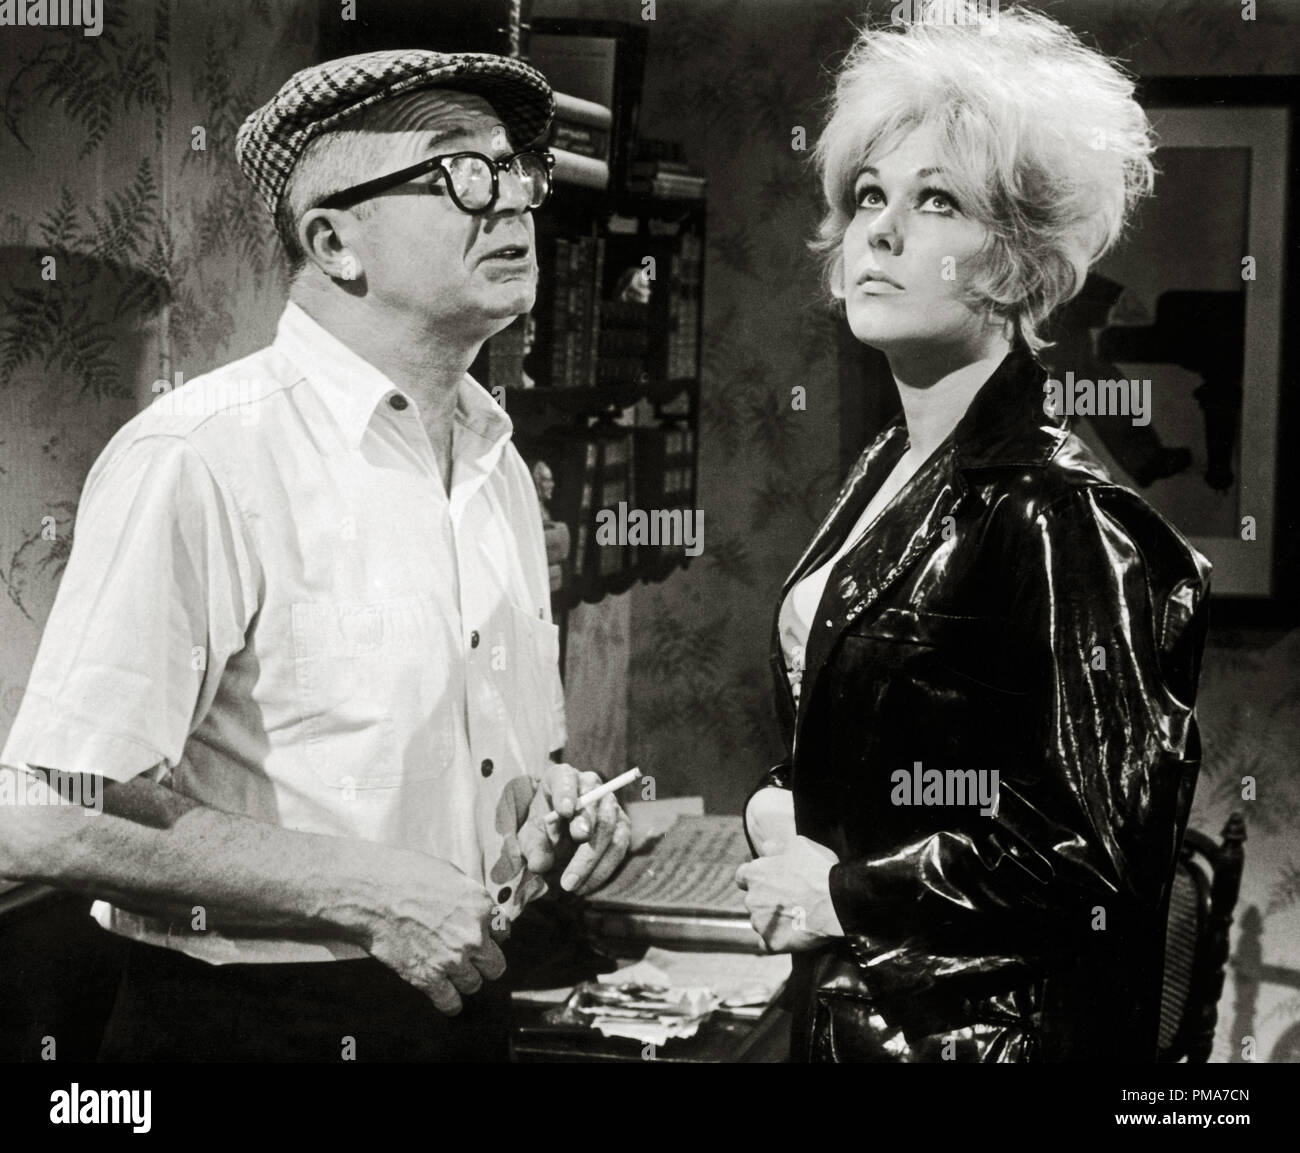 Billy Wilder and Kim Novak on the set of his film, "Kiss Me, Stupid", 1964  Lopert Pictures File Reference # 32263 270THA Stock Photo - Alamy